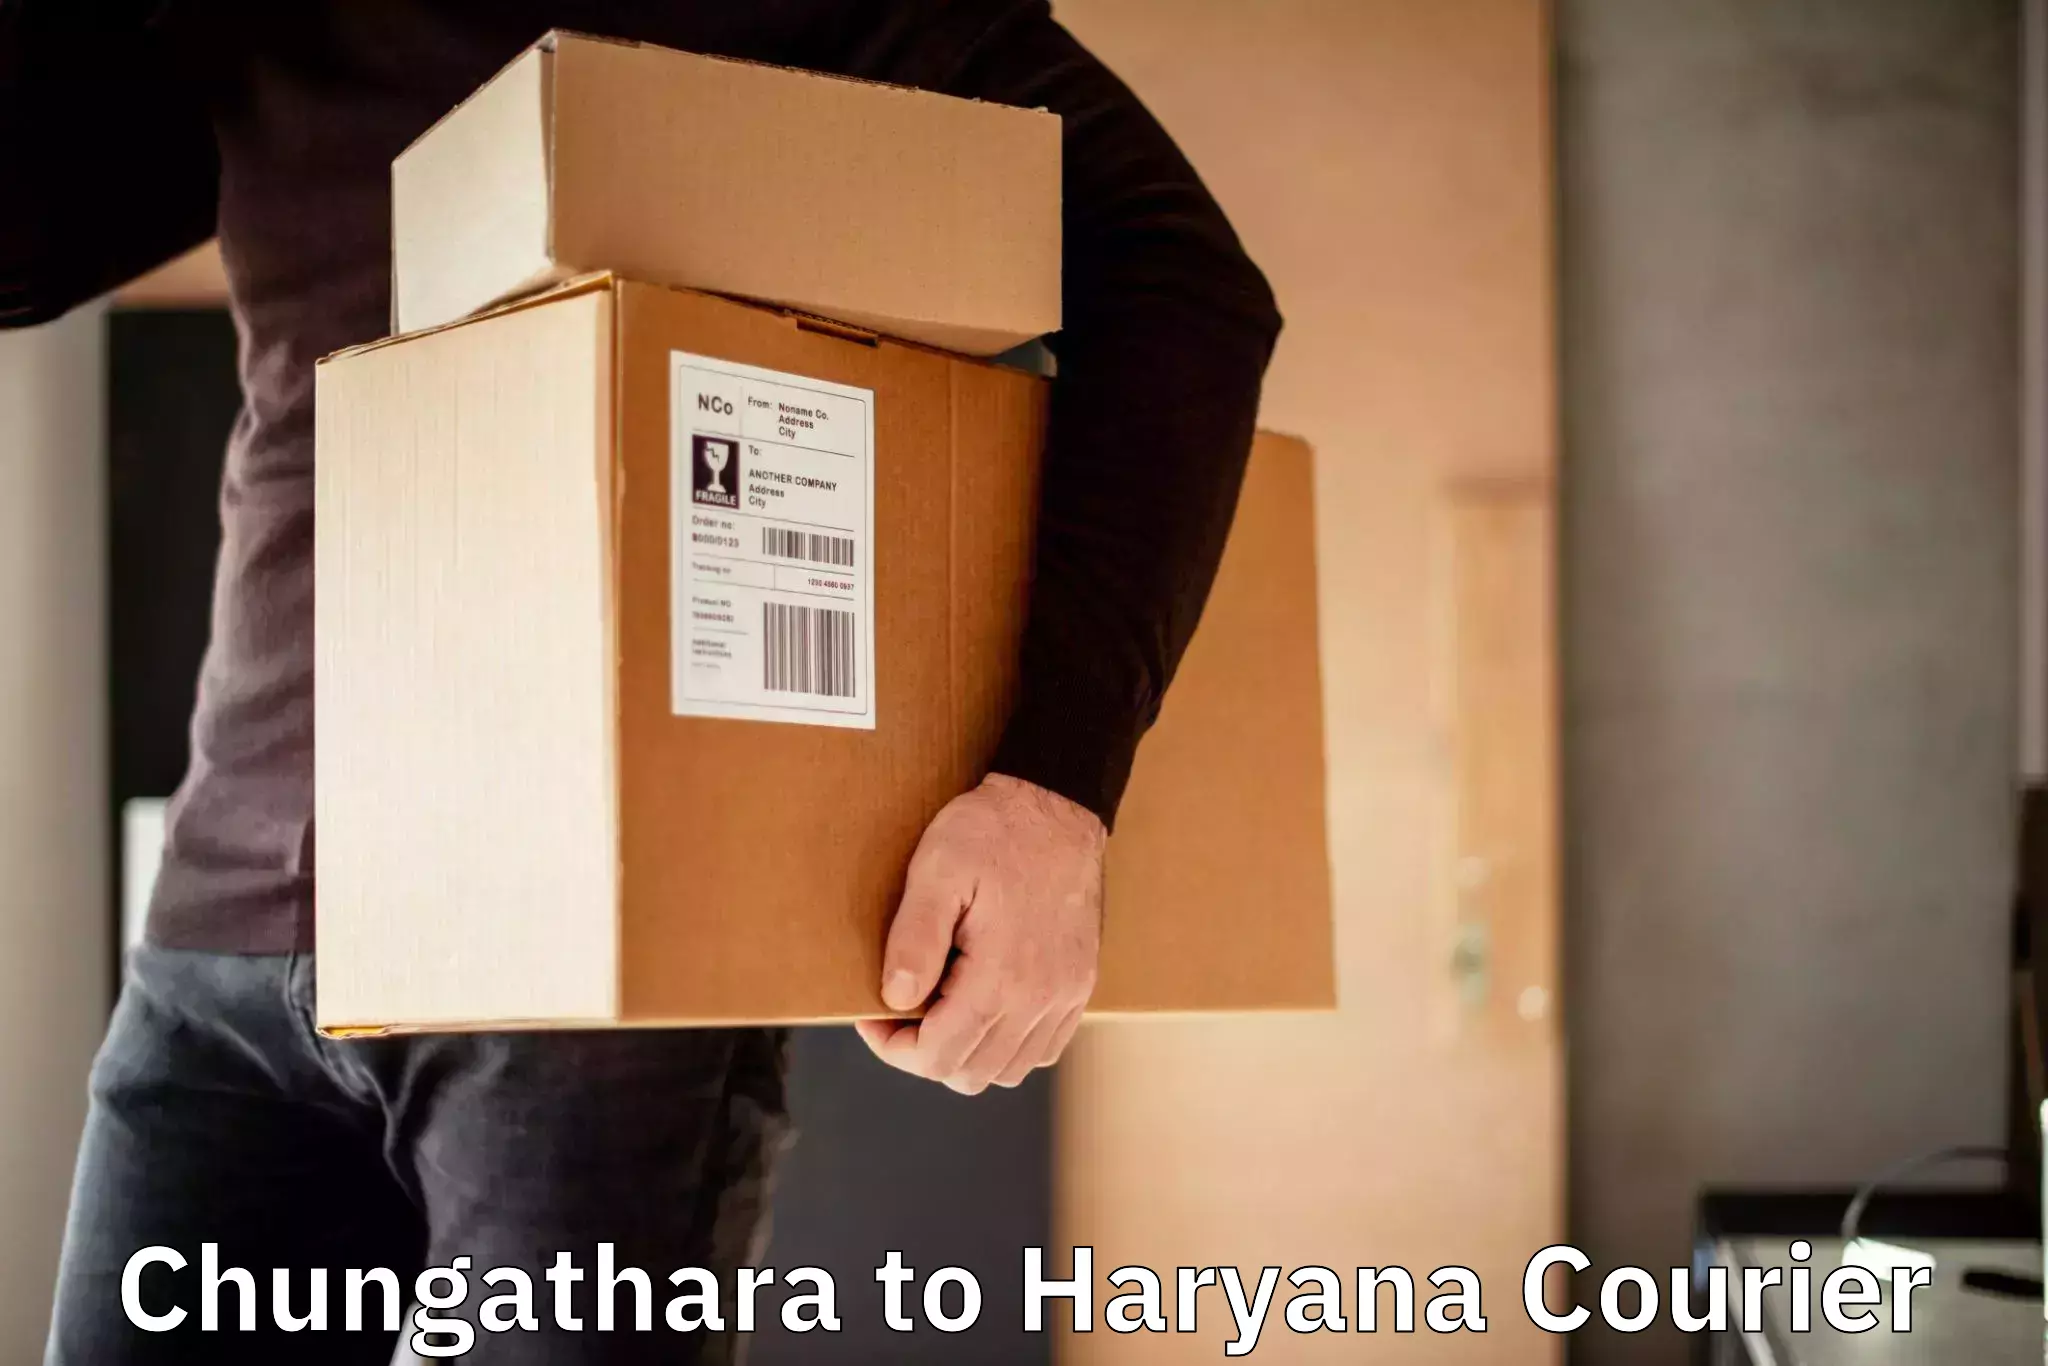 Fast delivery service Chungathara to Gurgaon